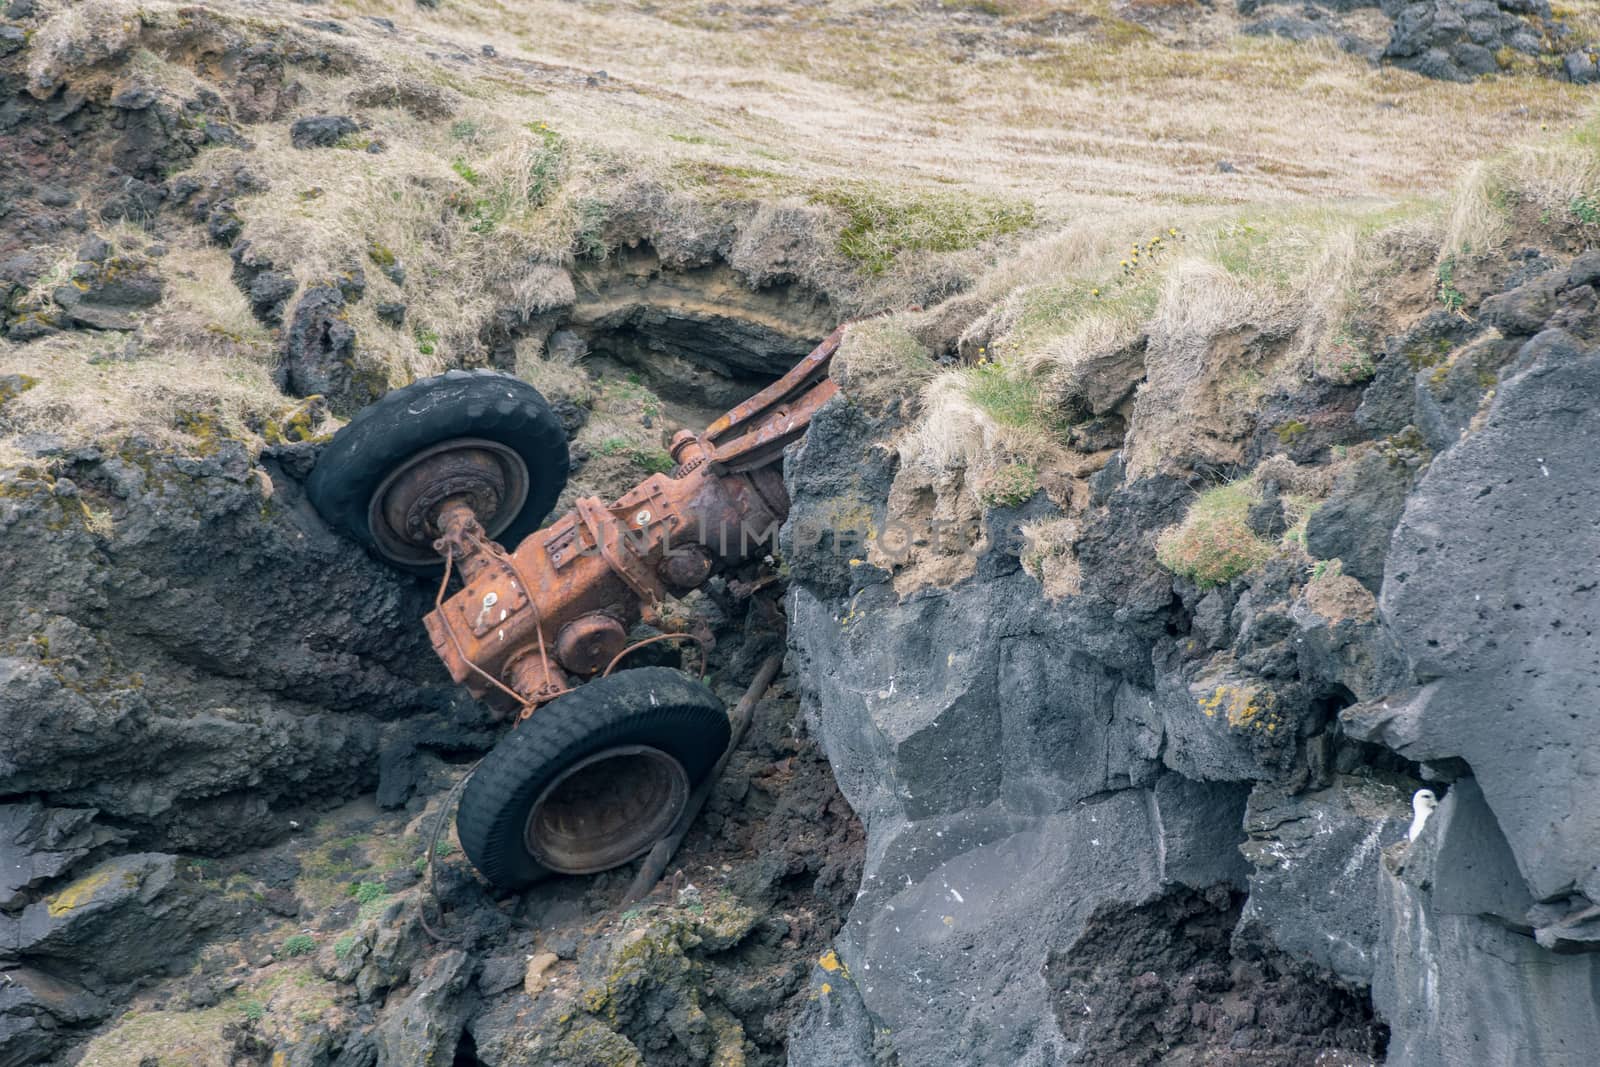 Tractor wreck by a cliff edge